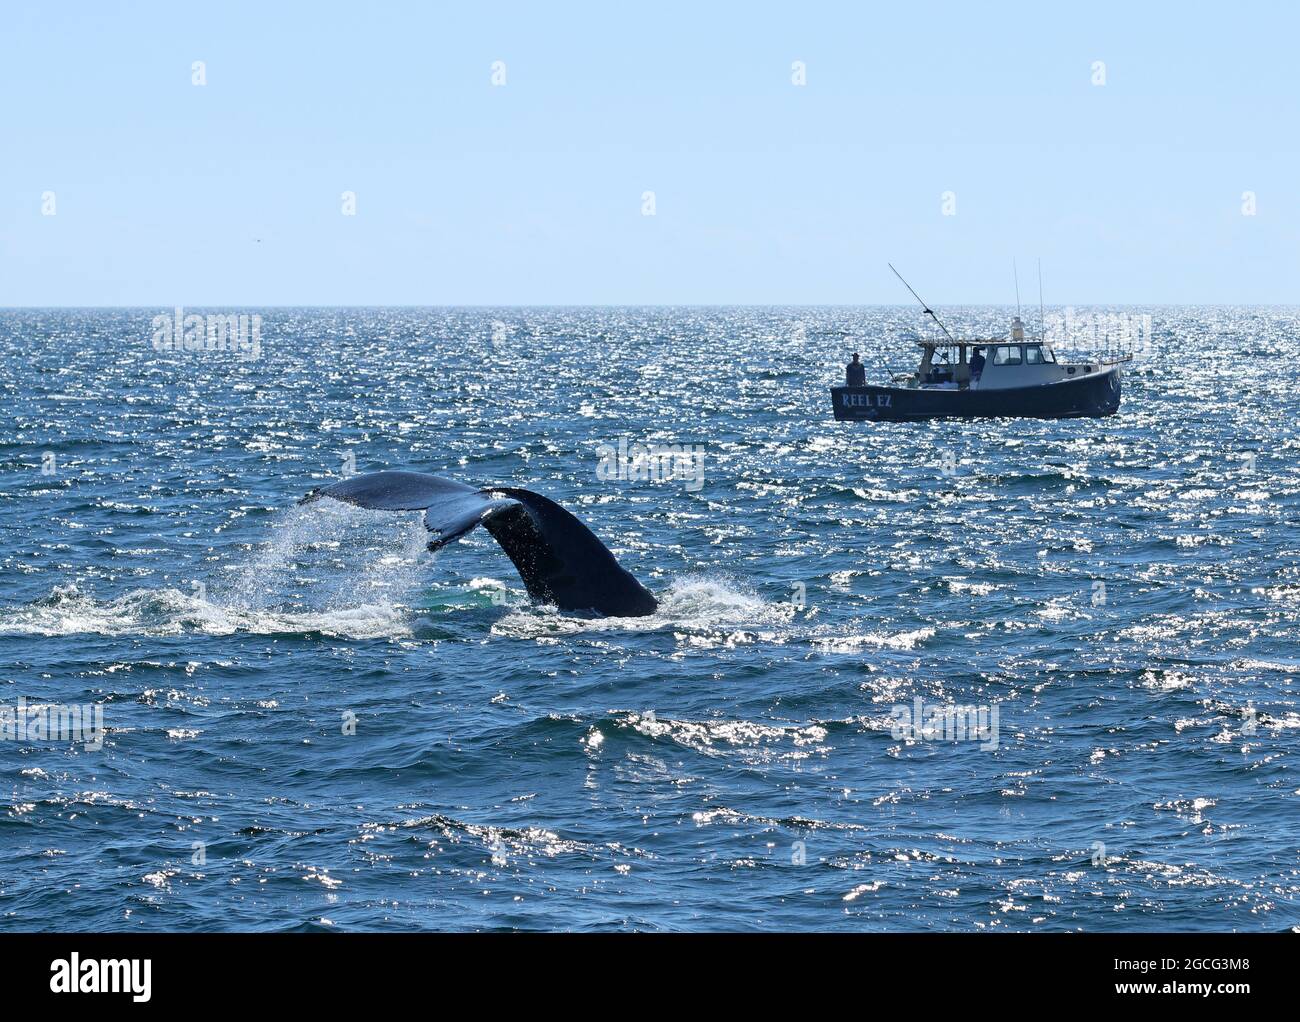 A small fishing boat in the background as a humpback whale (Megaptera novaeangliae) dives off the Cape Cod coast in the North Atlantic Ocean Stock Photo